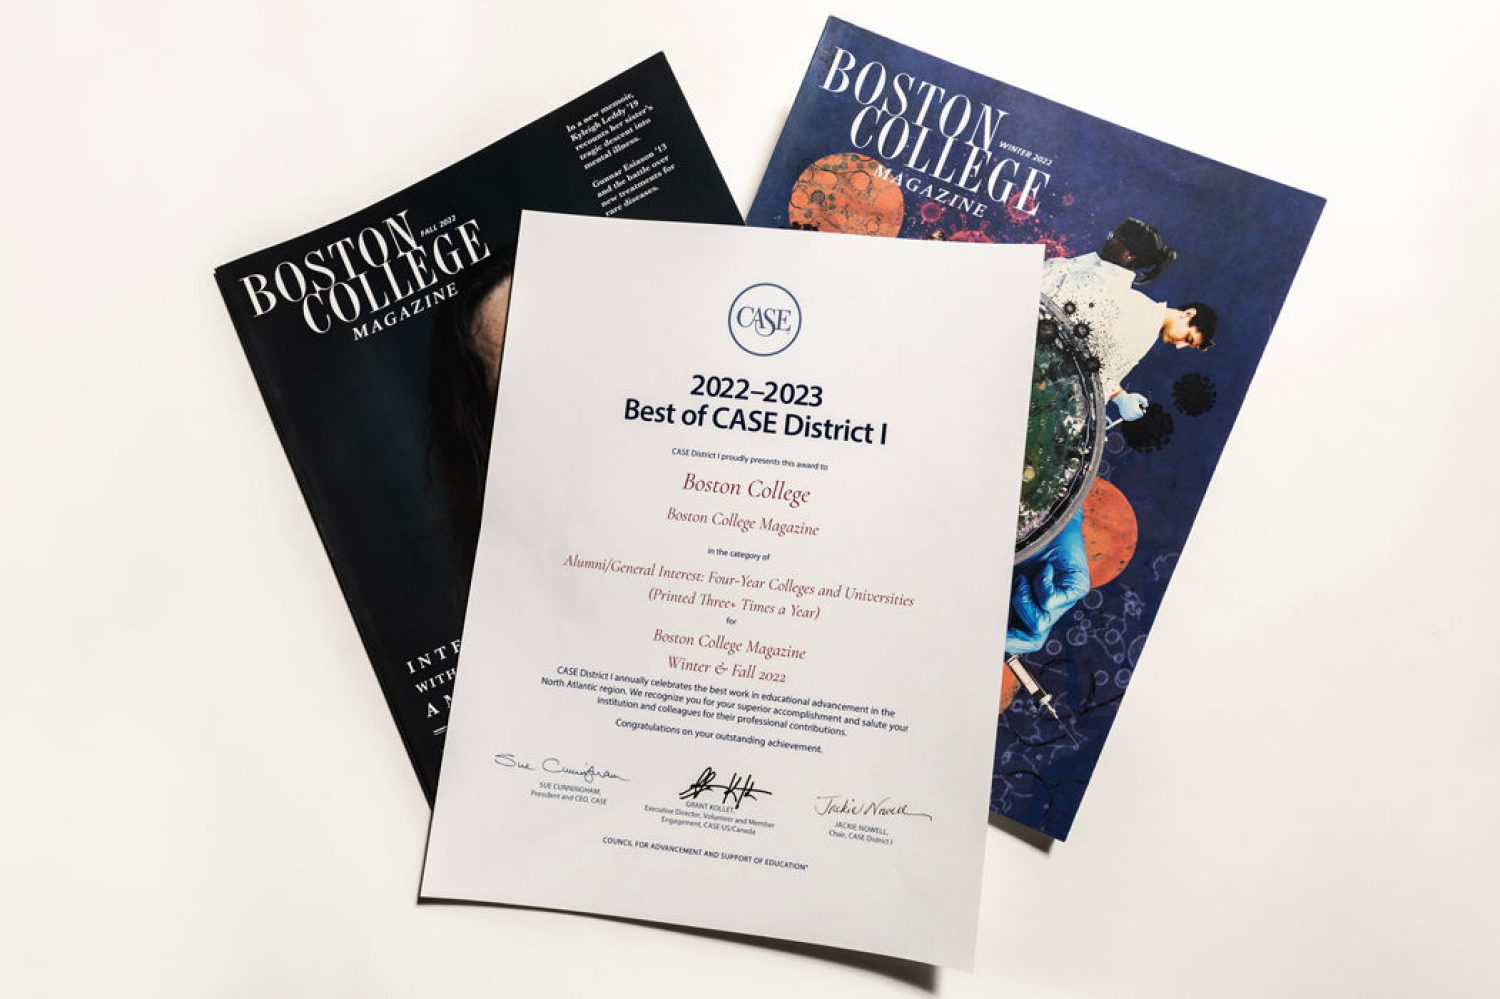 covers of two magazines and an awards certificate